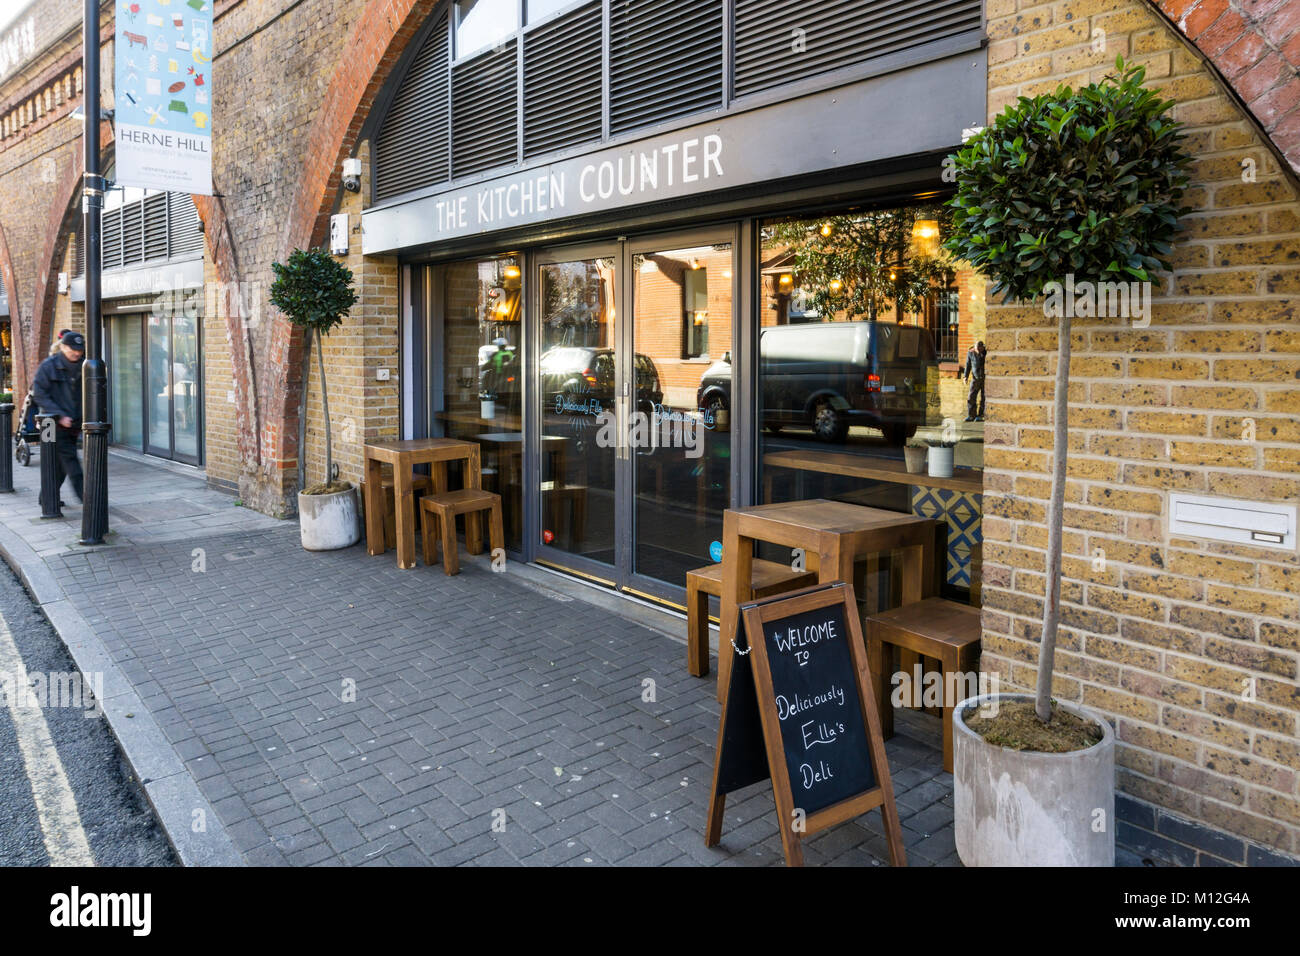 The Kitchen Counter deli restaurant in a railway arch in Herne Hill owned by Ella and Matthew Mills is part of the Deliciously Ella brand. Stock Photo